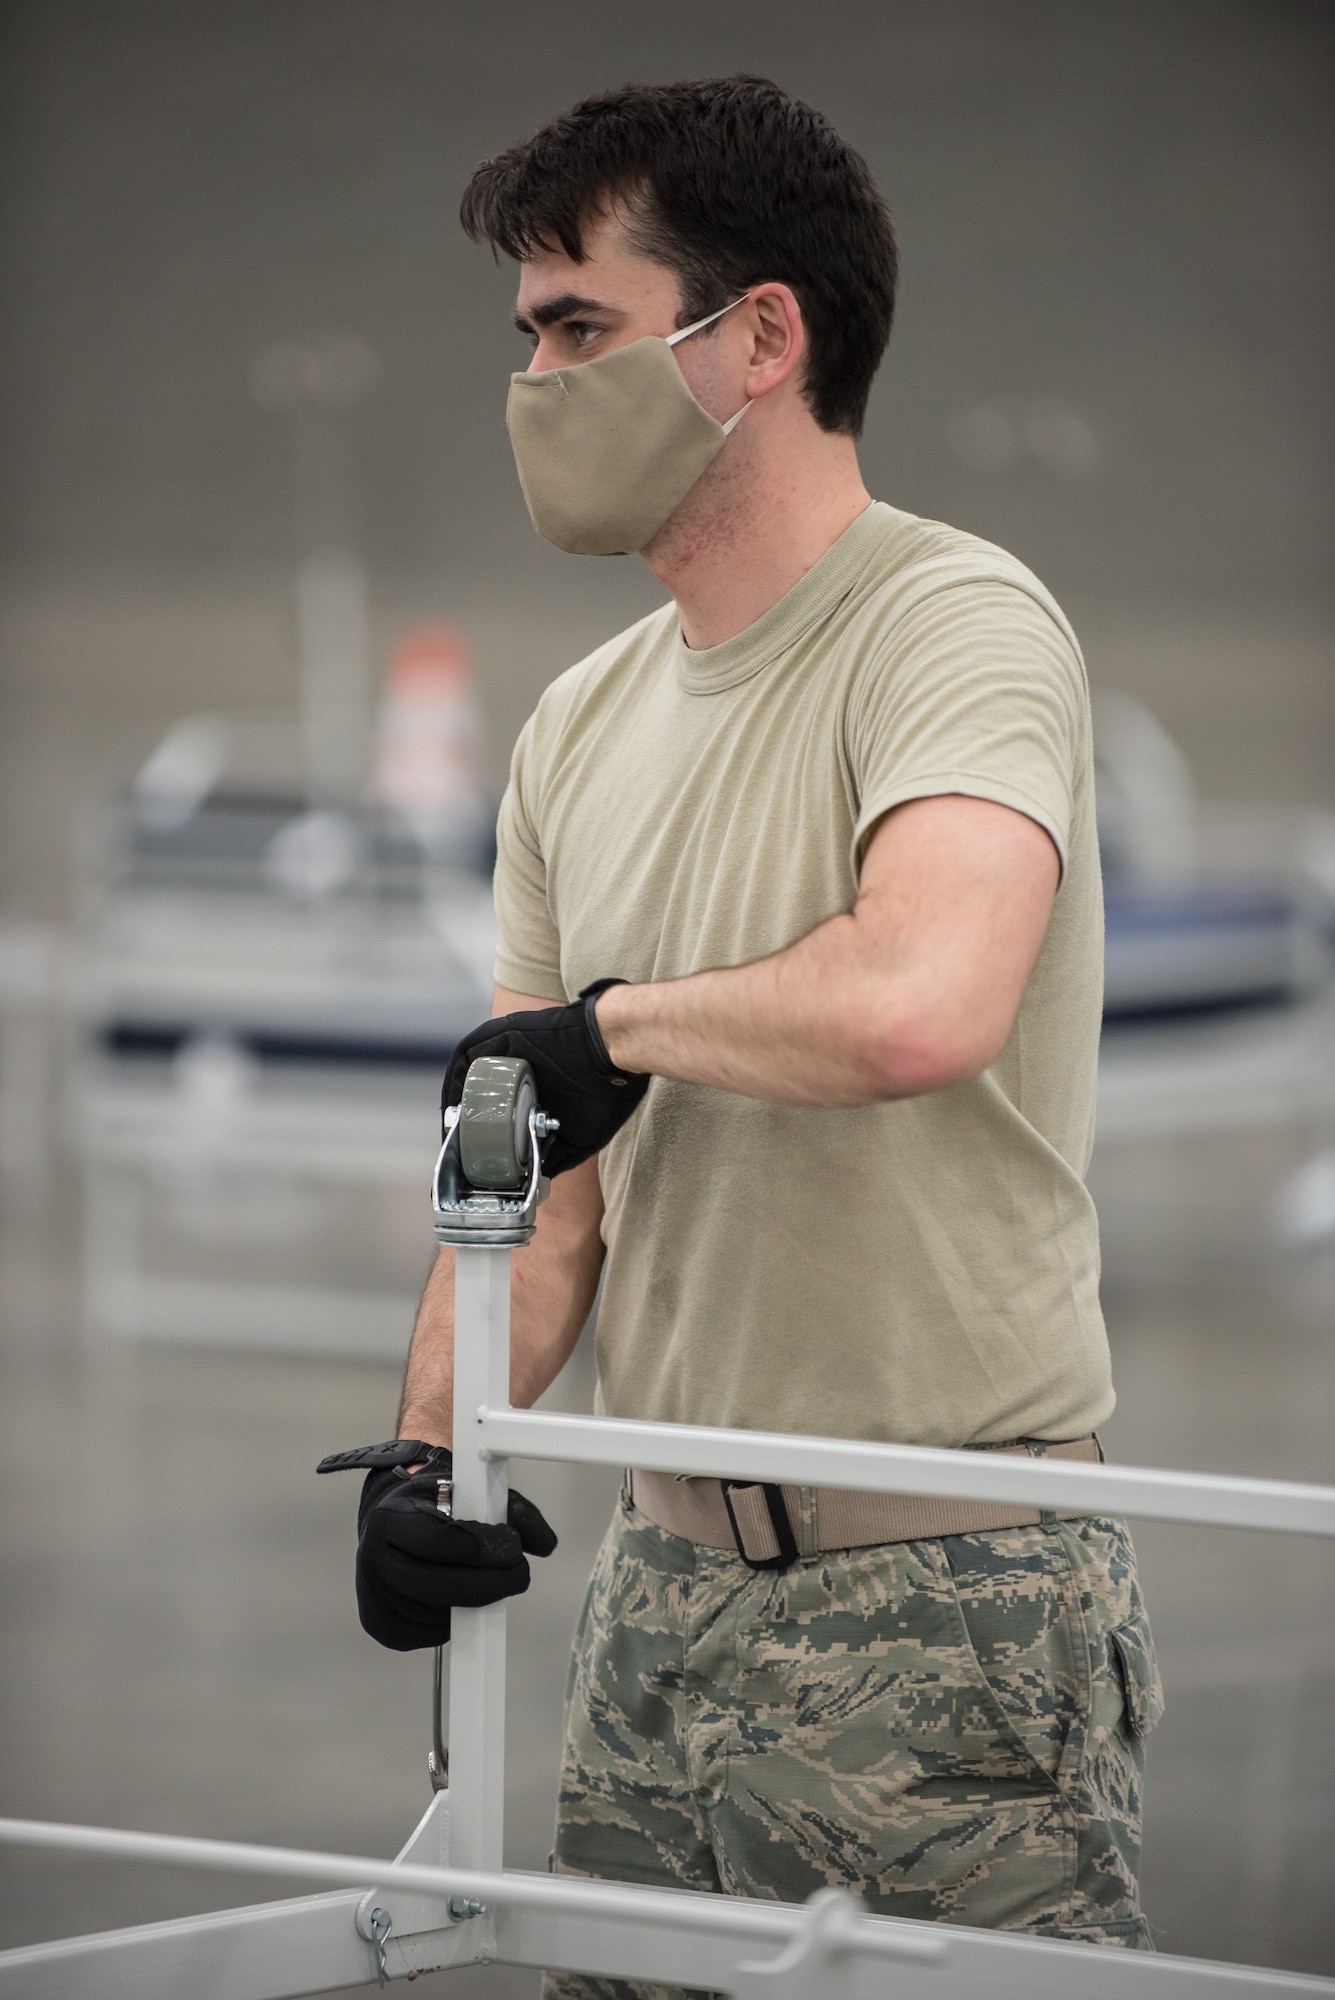 Airman 1st Class Tristan Baxter of the Kentucky Air National Guard’s 123rd Civil Engineer Squadron sets up hospital beds and clinical space at the Kentucky Fair and Exposition Center in Louisville, Ky., April 13, 2020. The site, which is expected to be operational April 15, will serve as an Alternate Care Facility for patients suffering from COVID-19 if area hospitals exceed available capacity. The location initially can treat up to 288 patients and is scalable to 2,000 beds. (U.S. Air National Guard photo by Dale Greer)